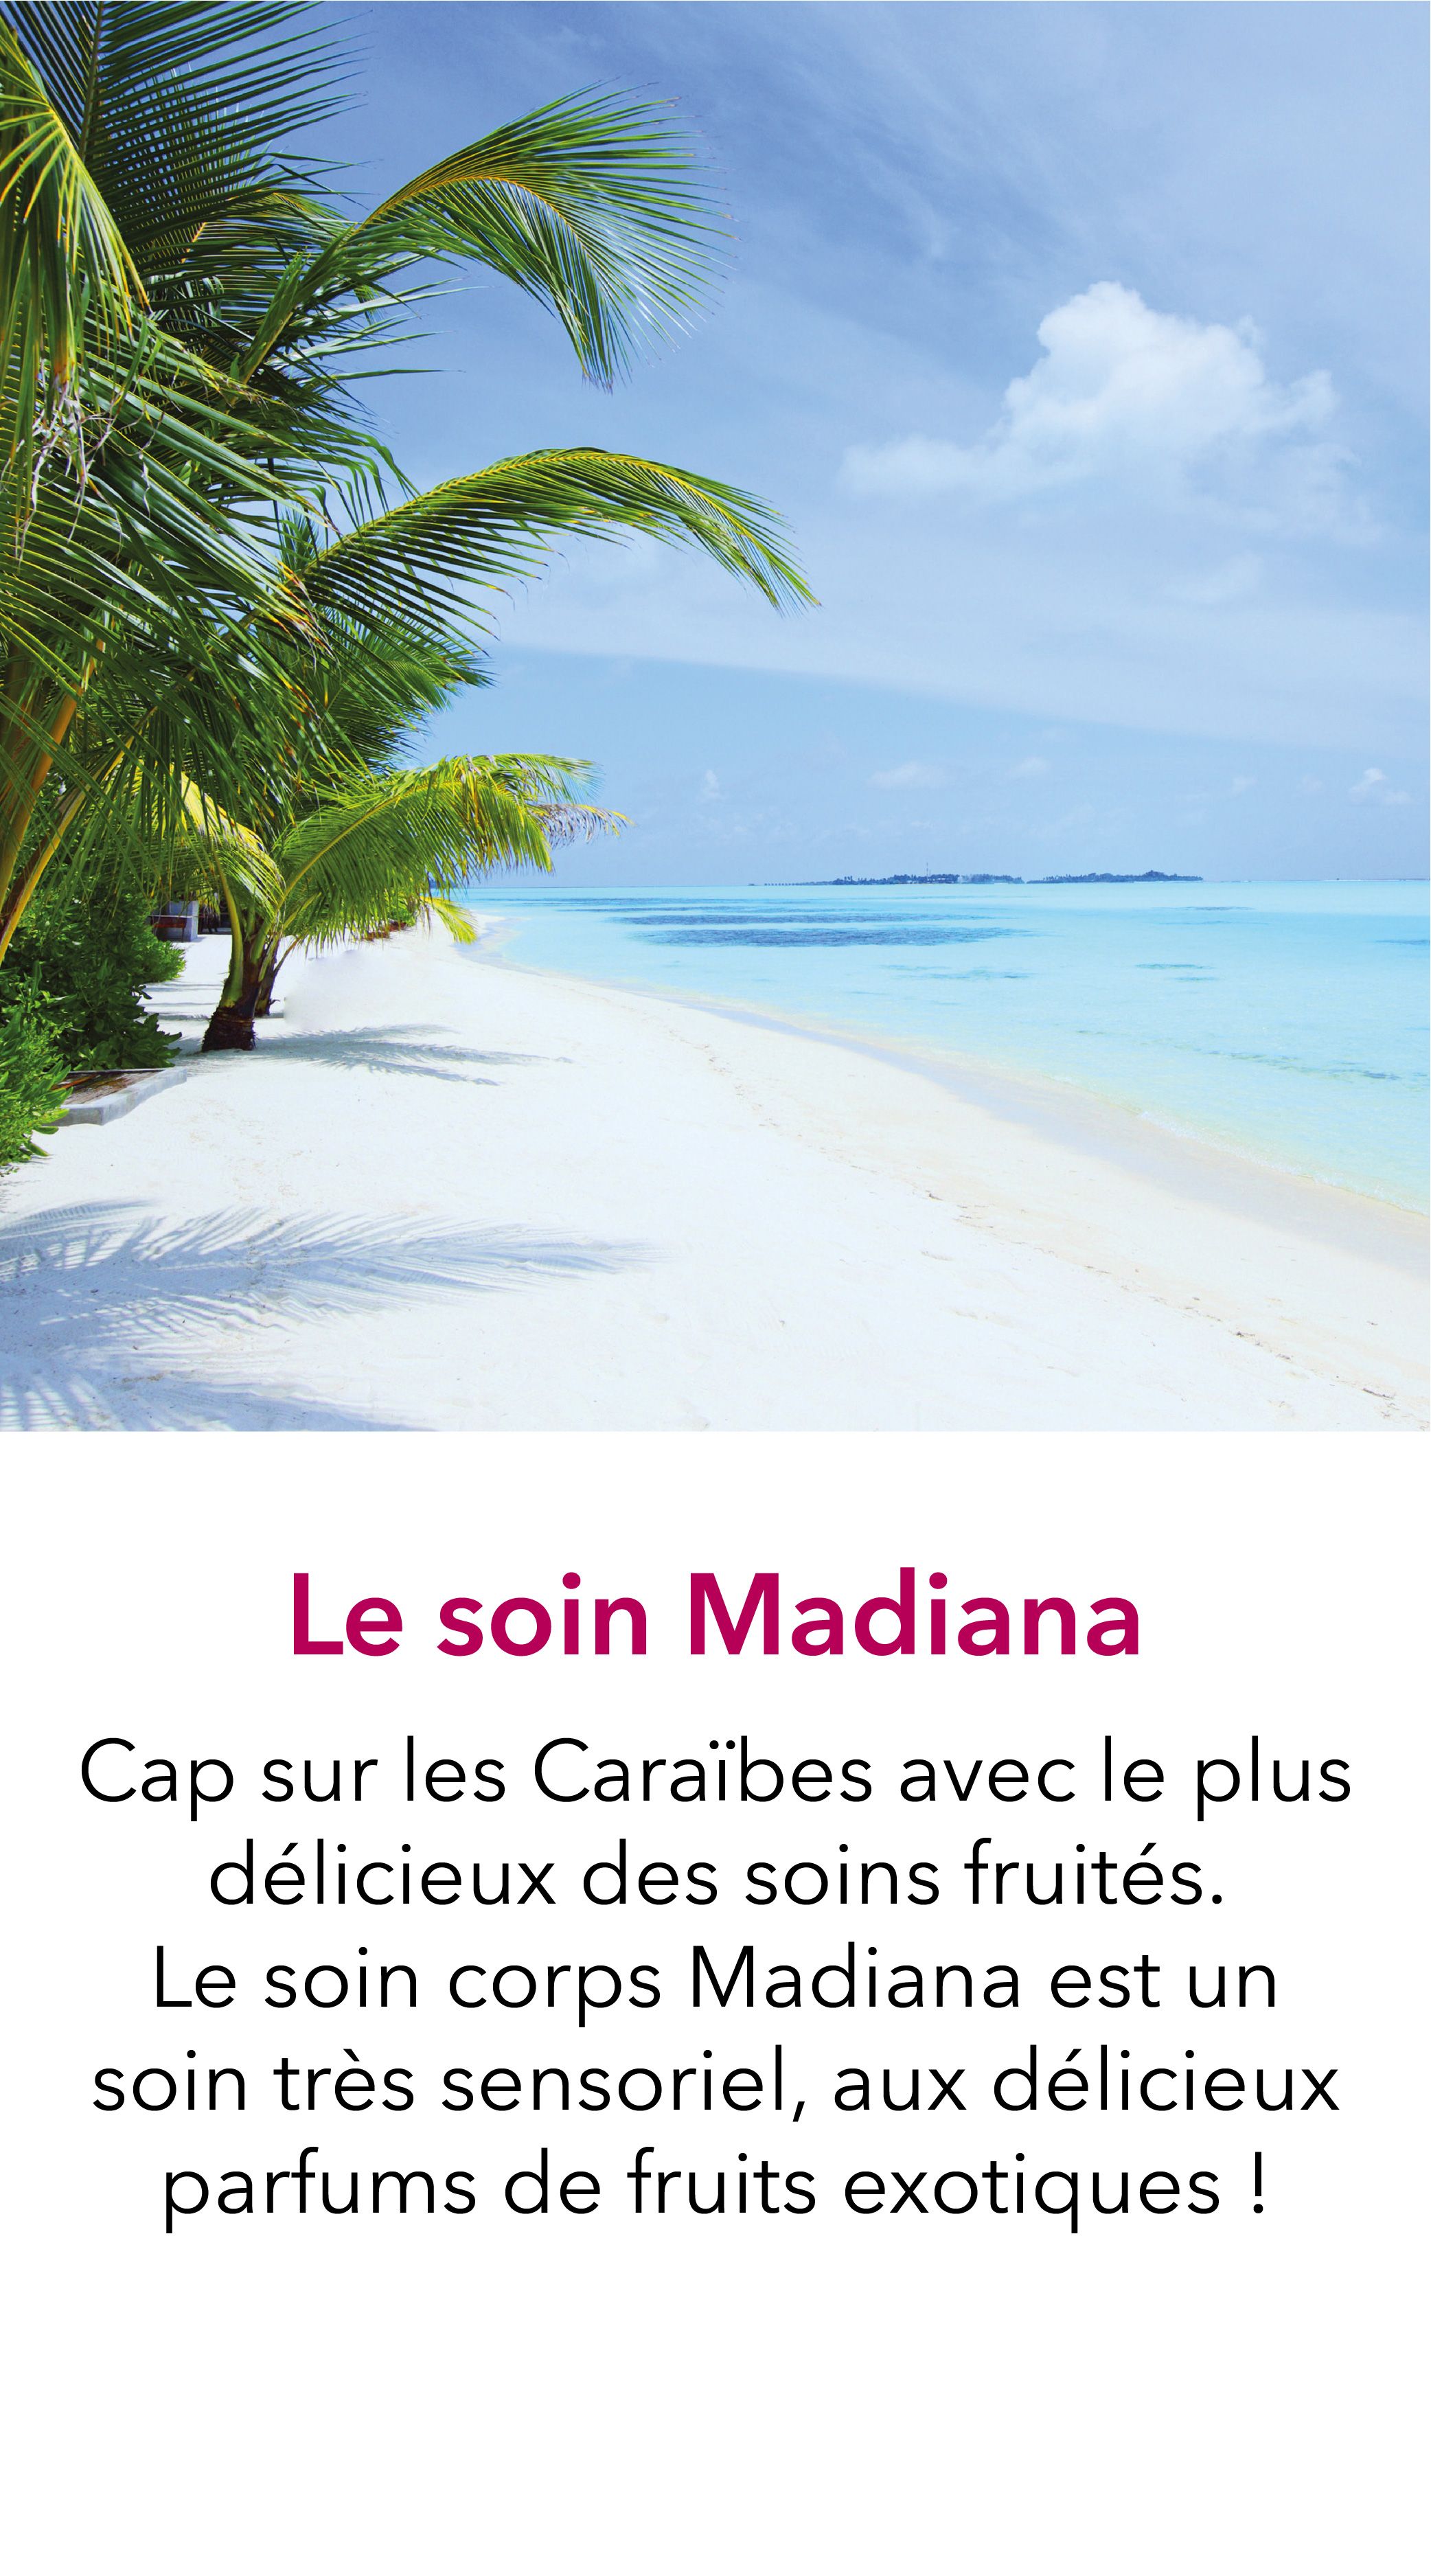 Le soin Madiana